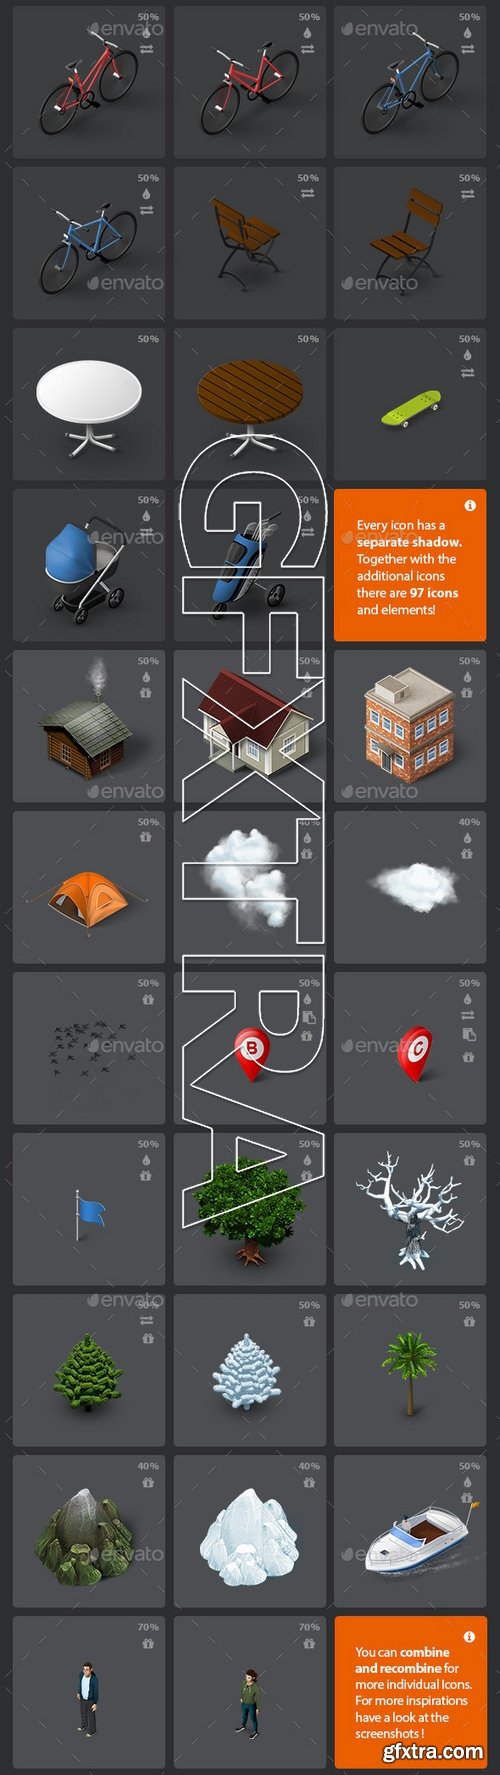 GraphicRiver - Isometric Map Icons - People 11432266